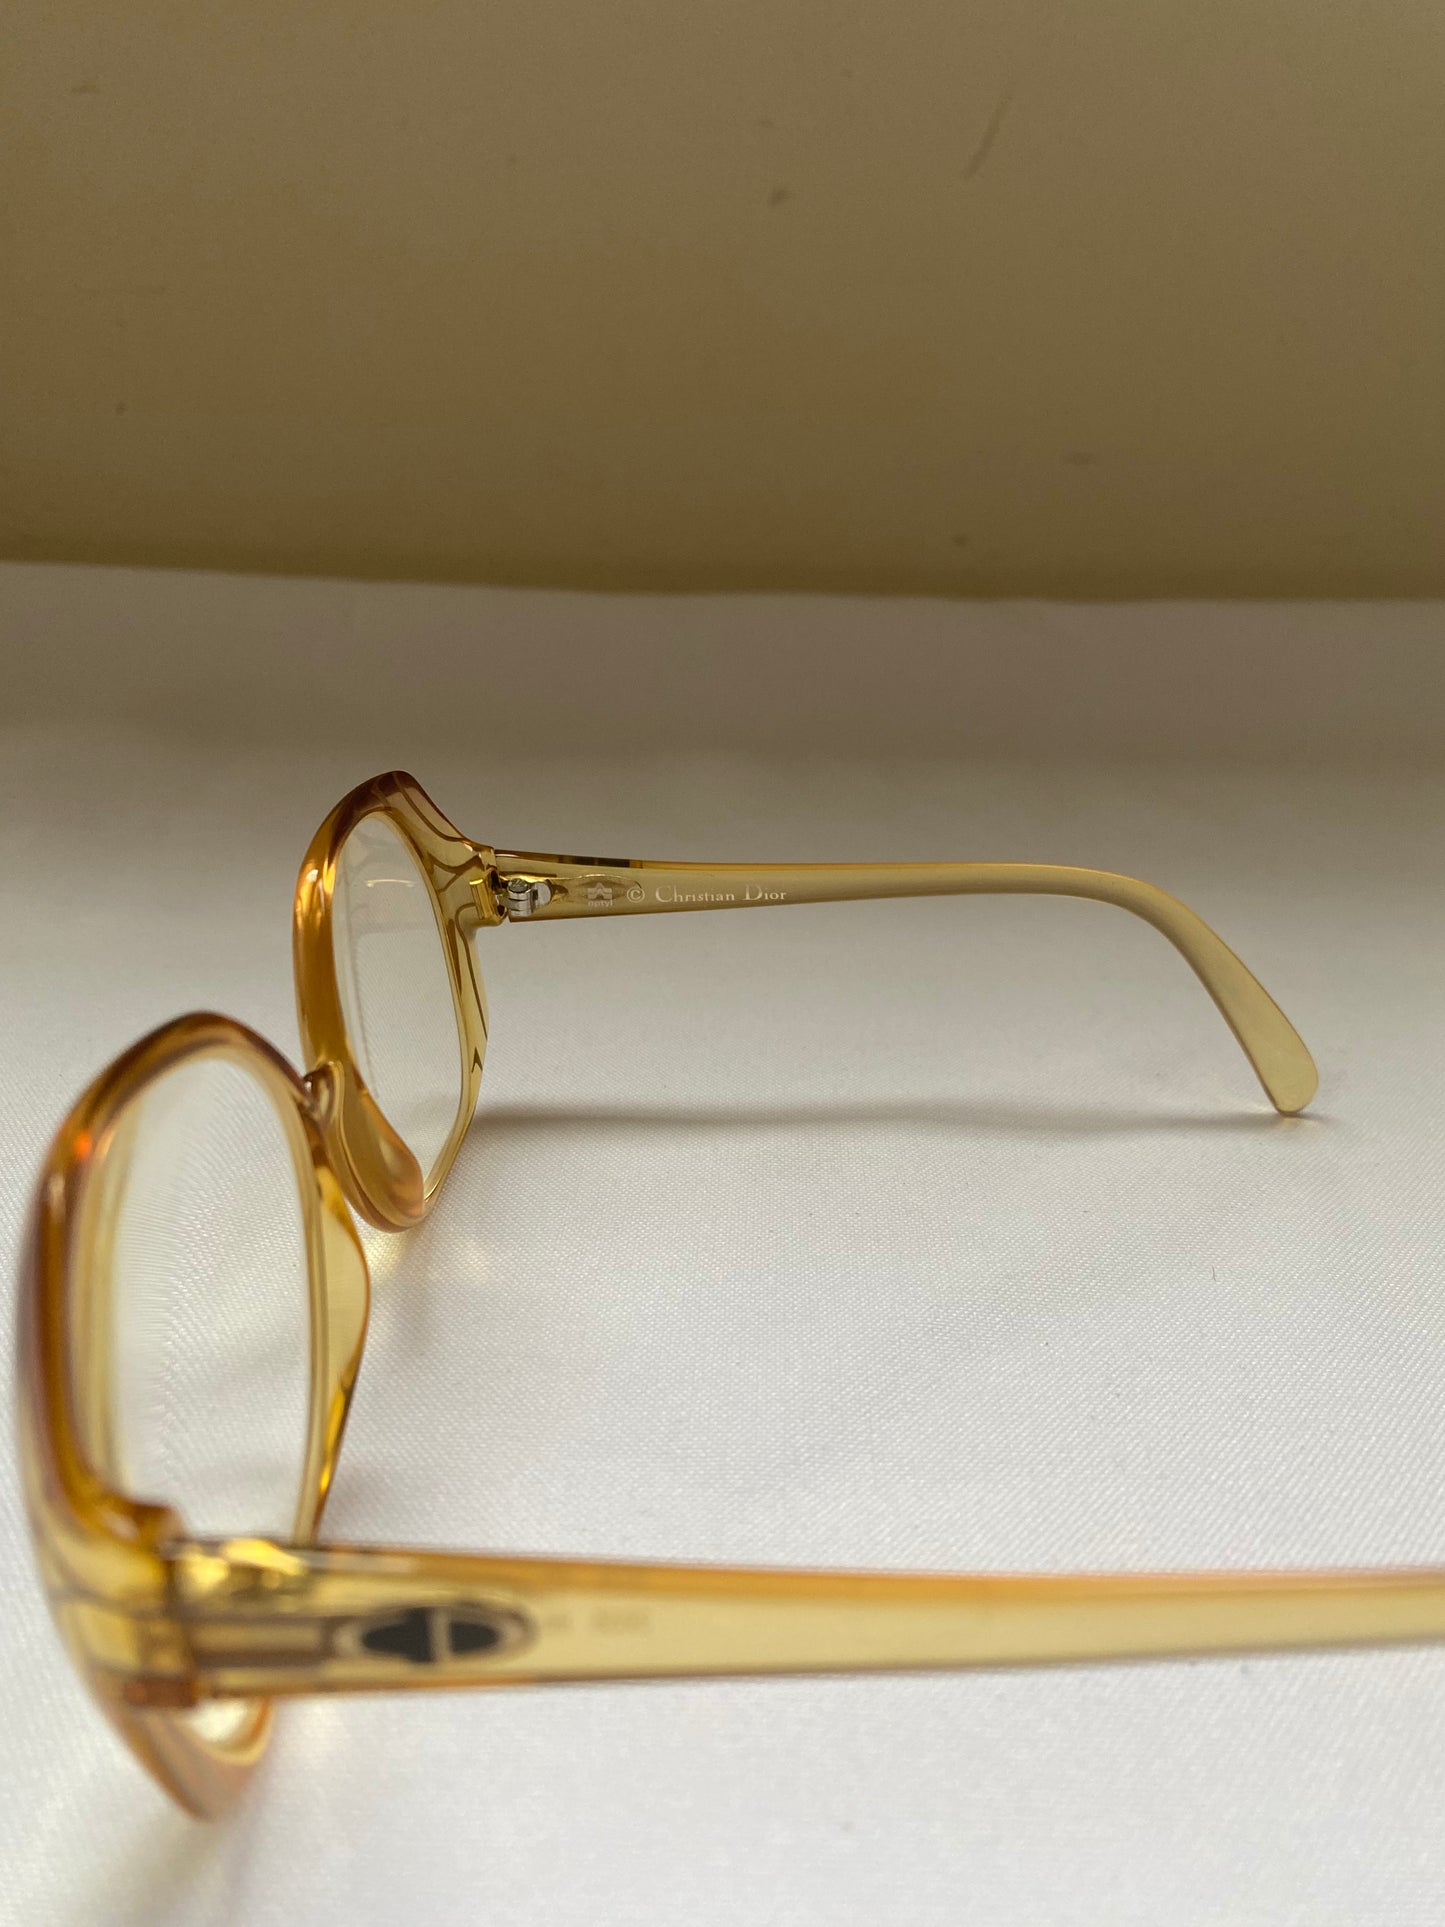 1970s Christain Dior Yellow Glasses